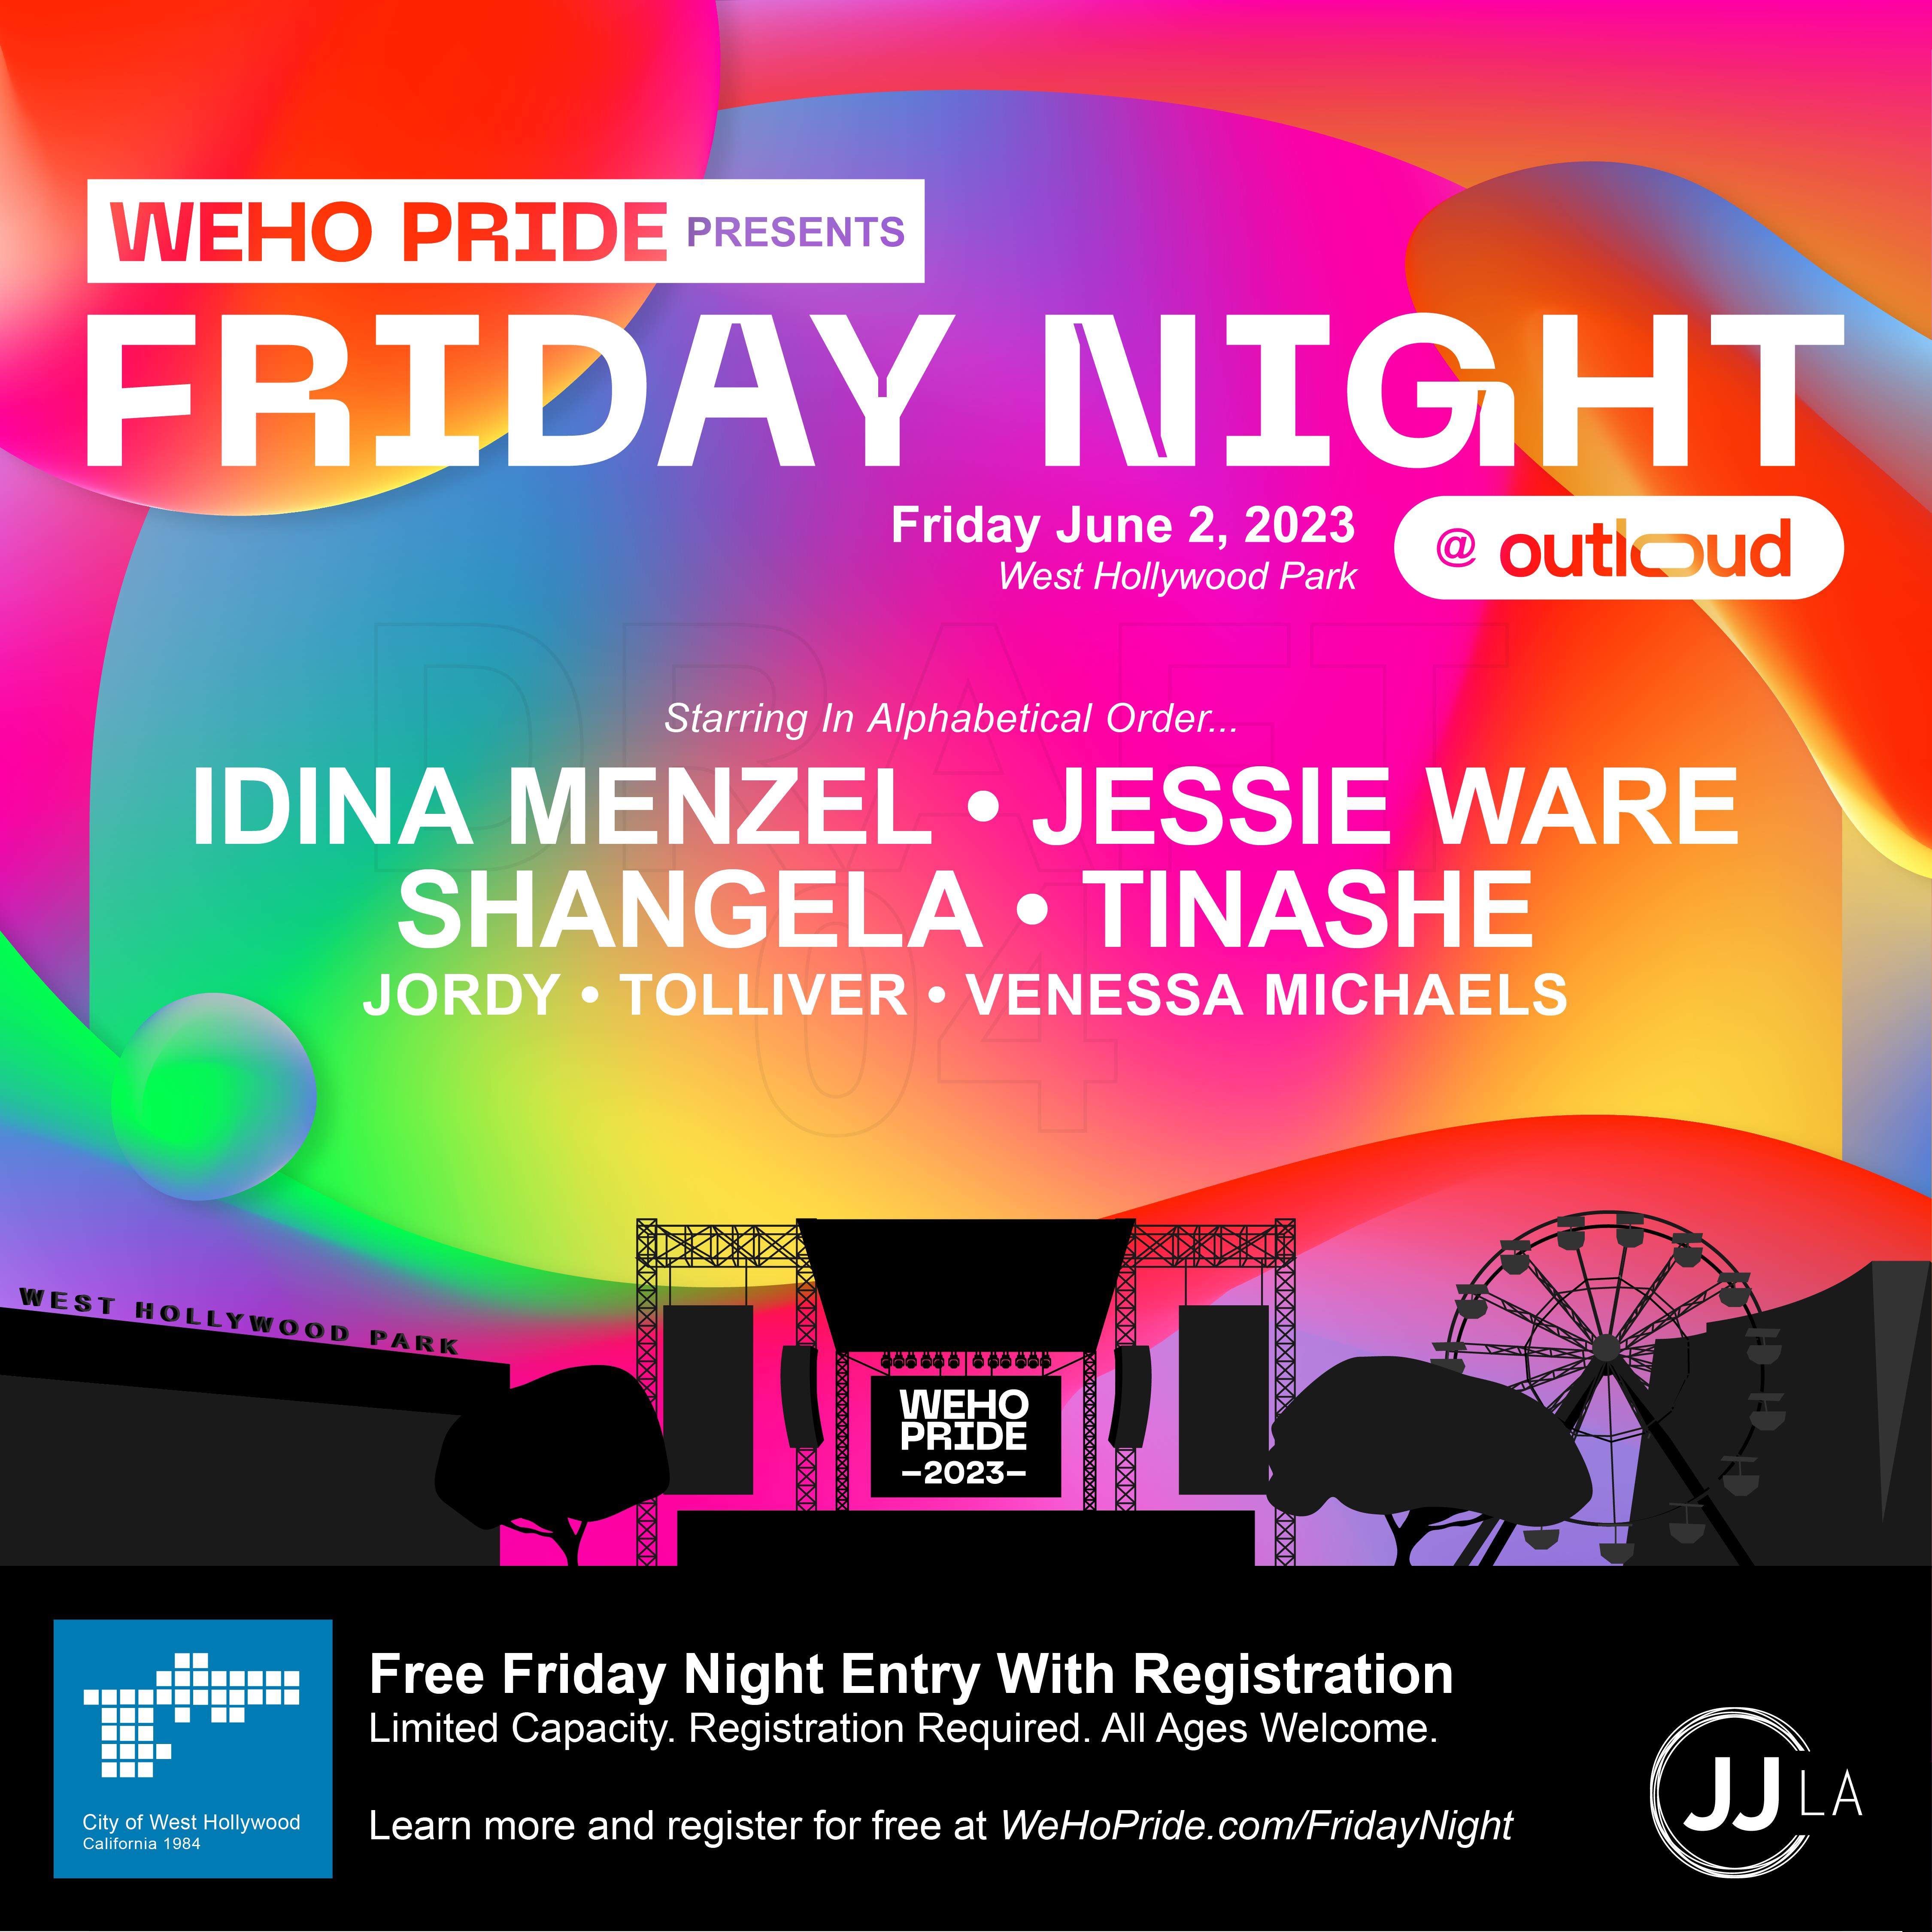 Buy Tickets to WeHo Pride Presents Friday Night OUTLOUD in West